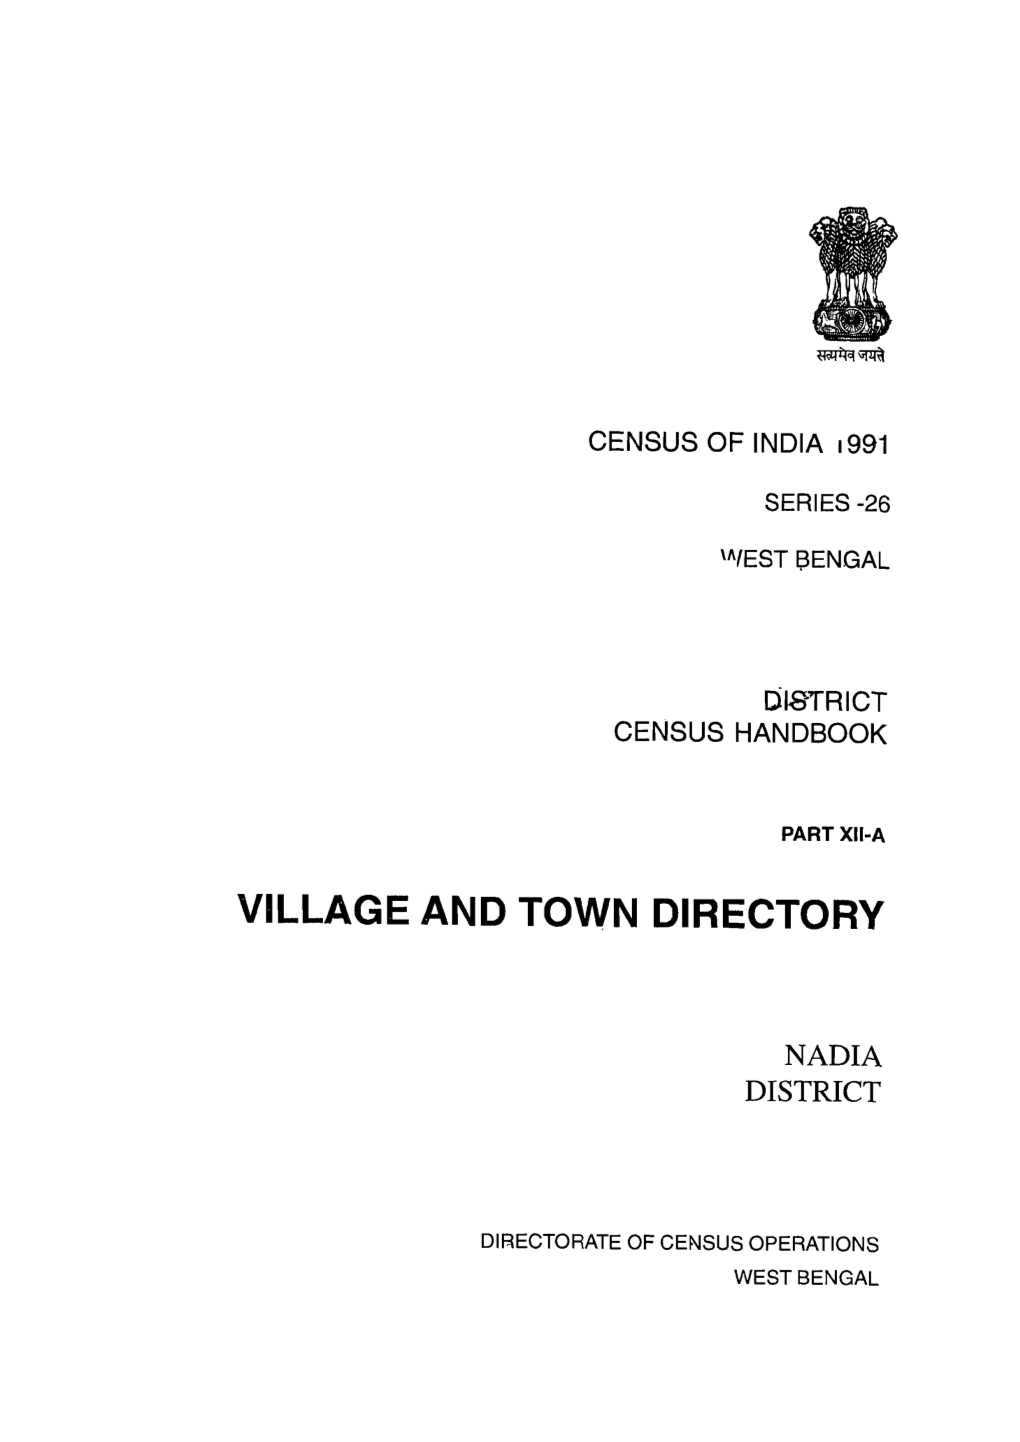 Village and Town Directory, Nadia, Part XII-A , Series-26, West Bengal